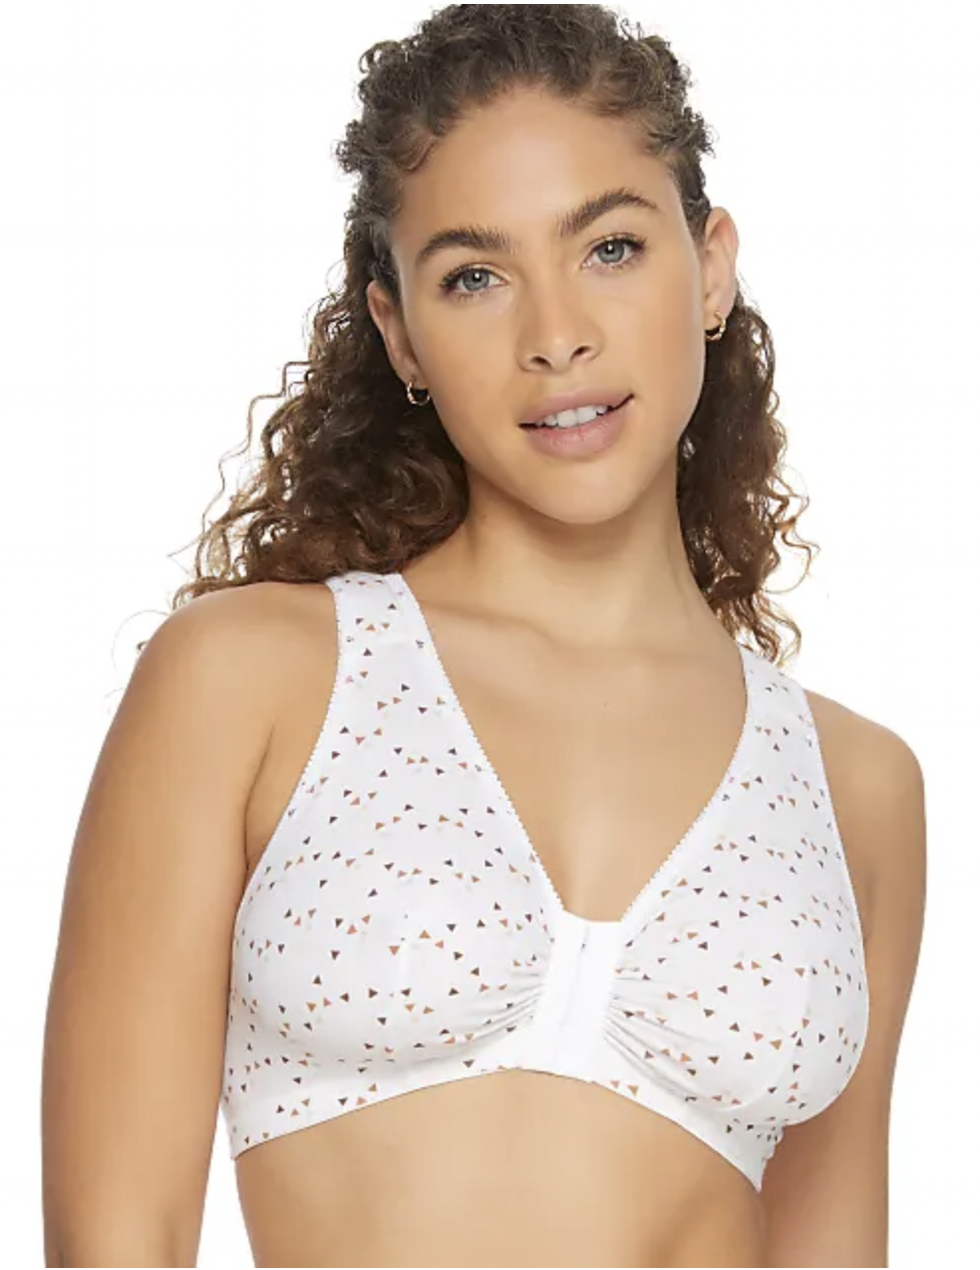 17 Best Sleep Bras That Are Supportive and Comfy Enough to Wear